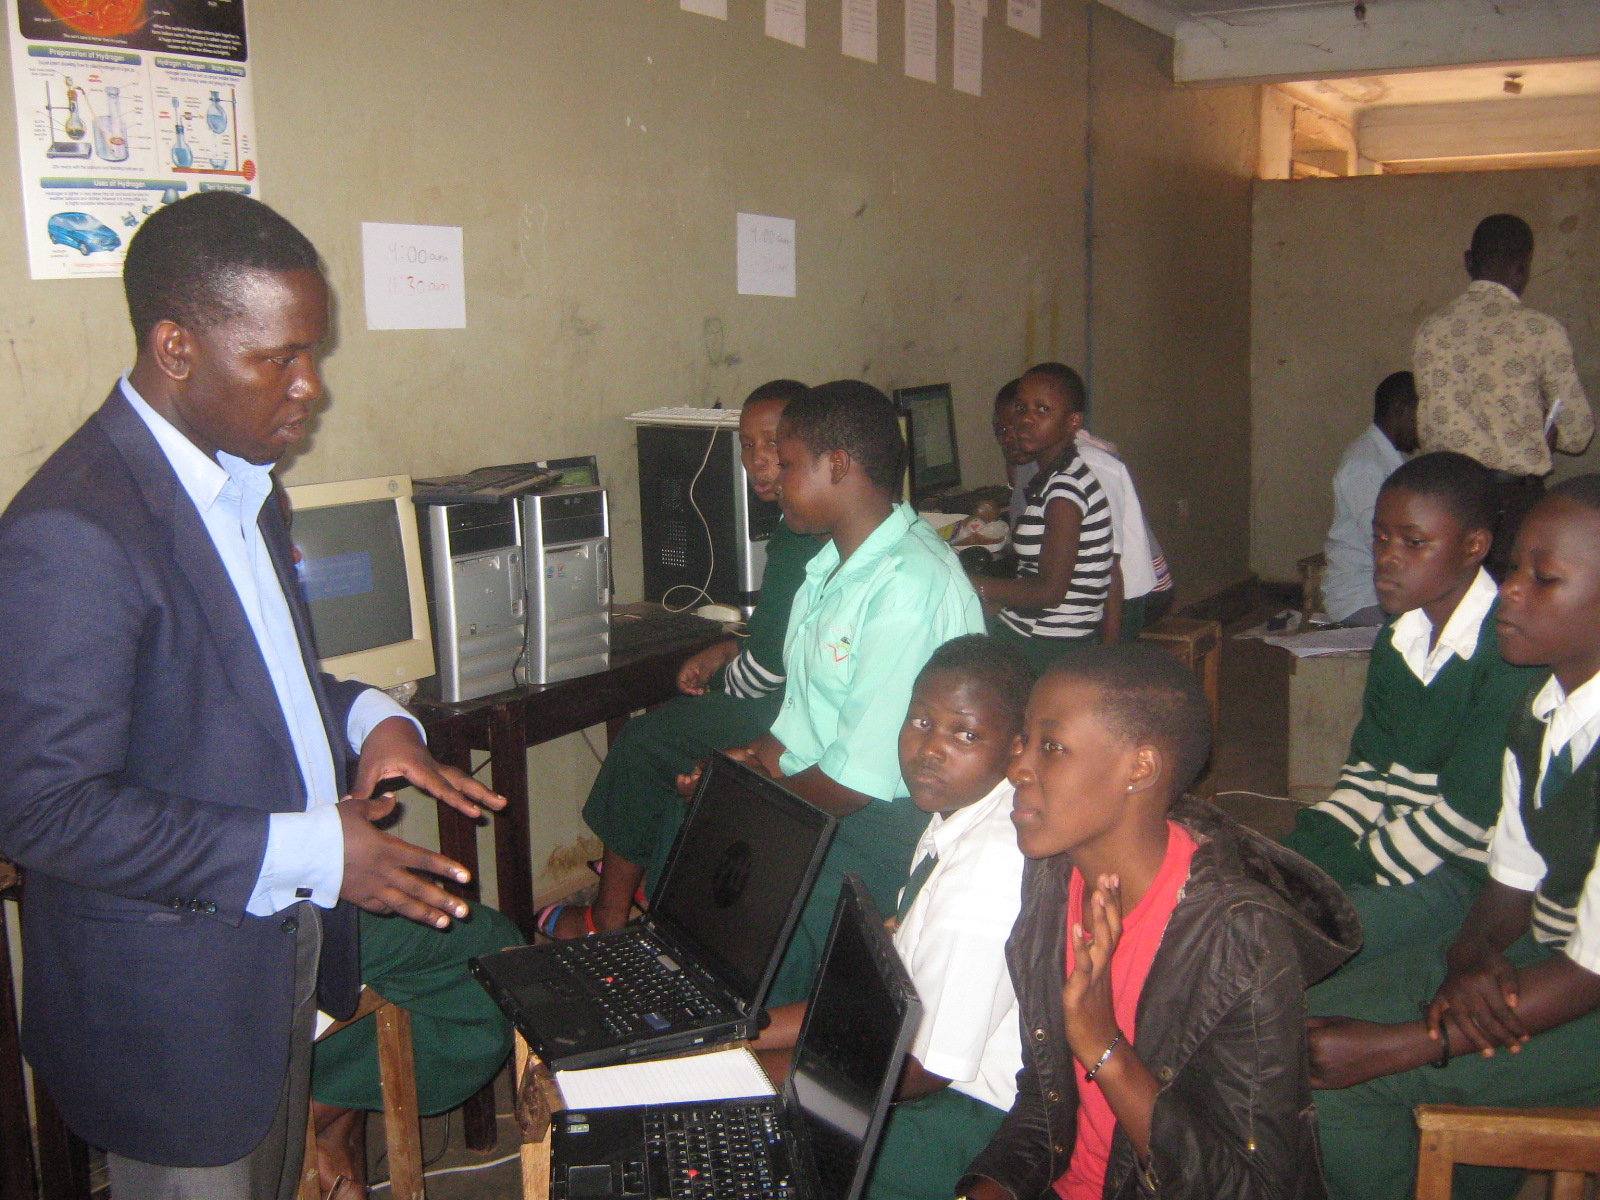 This year’s highlights include Girls in ICT Day event where we introduced ICT tools to girls from Kitebi Secondary School in Wakiso district, Uganda. Kibeti is a slum area where many people live below the poverty line and don’t have access to ICT tools.  